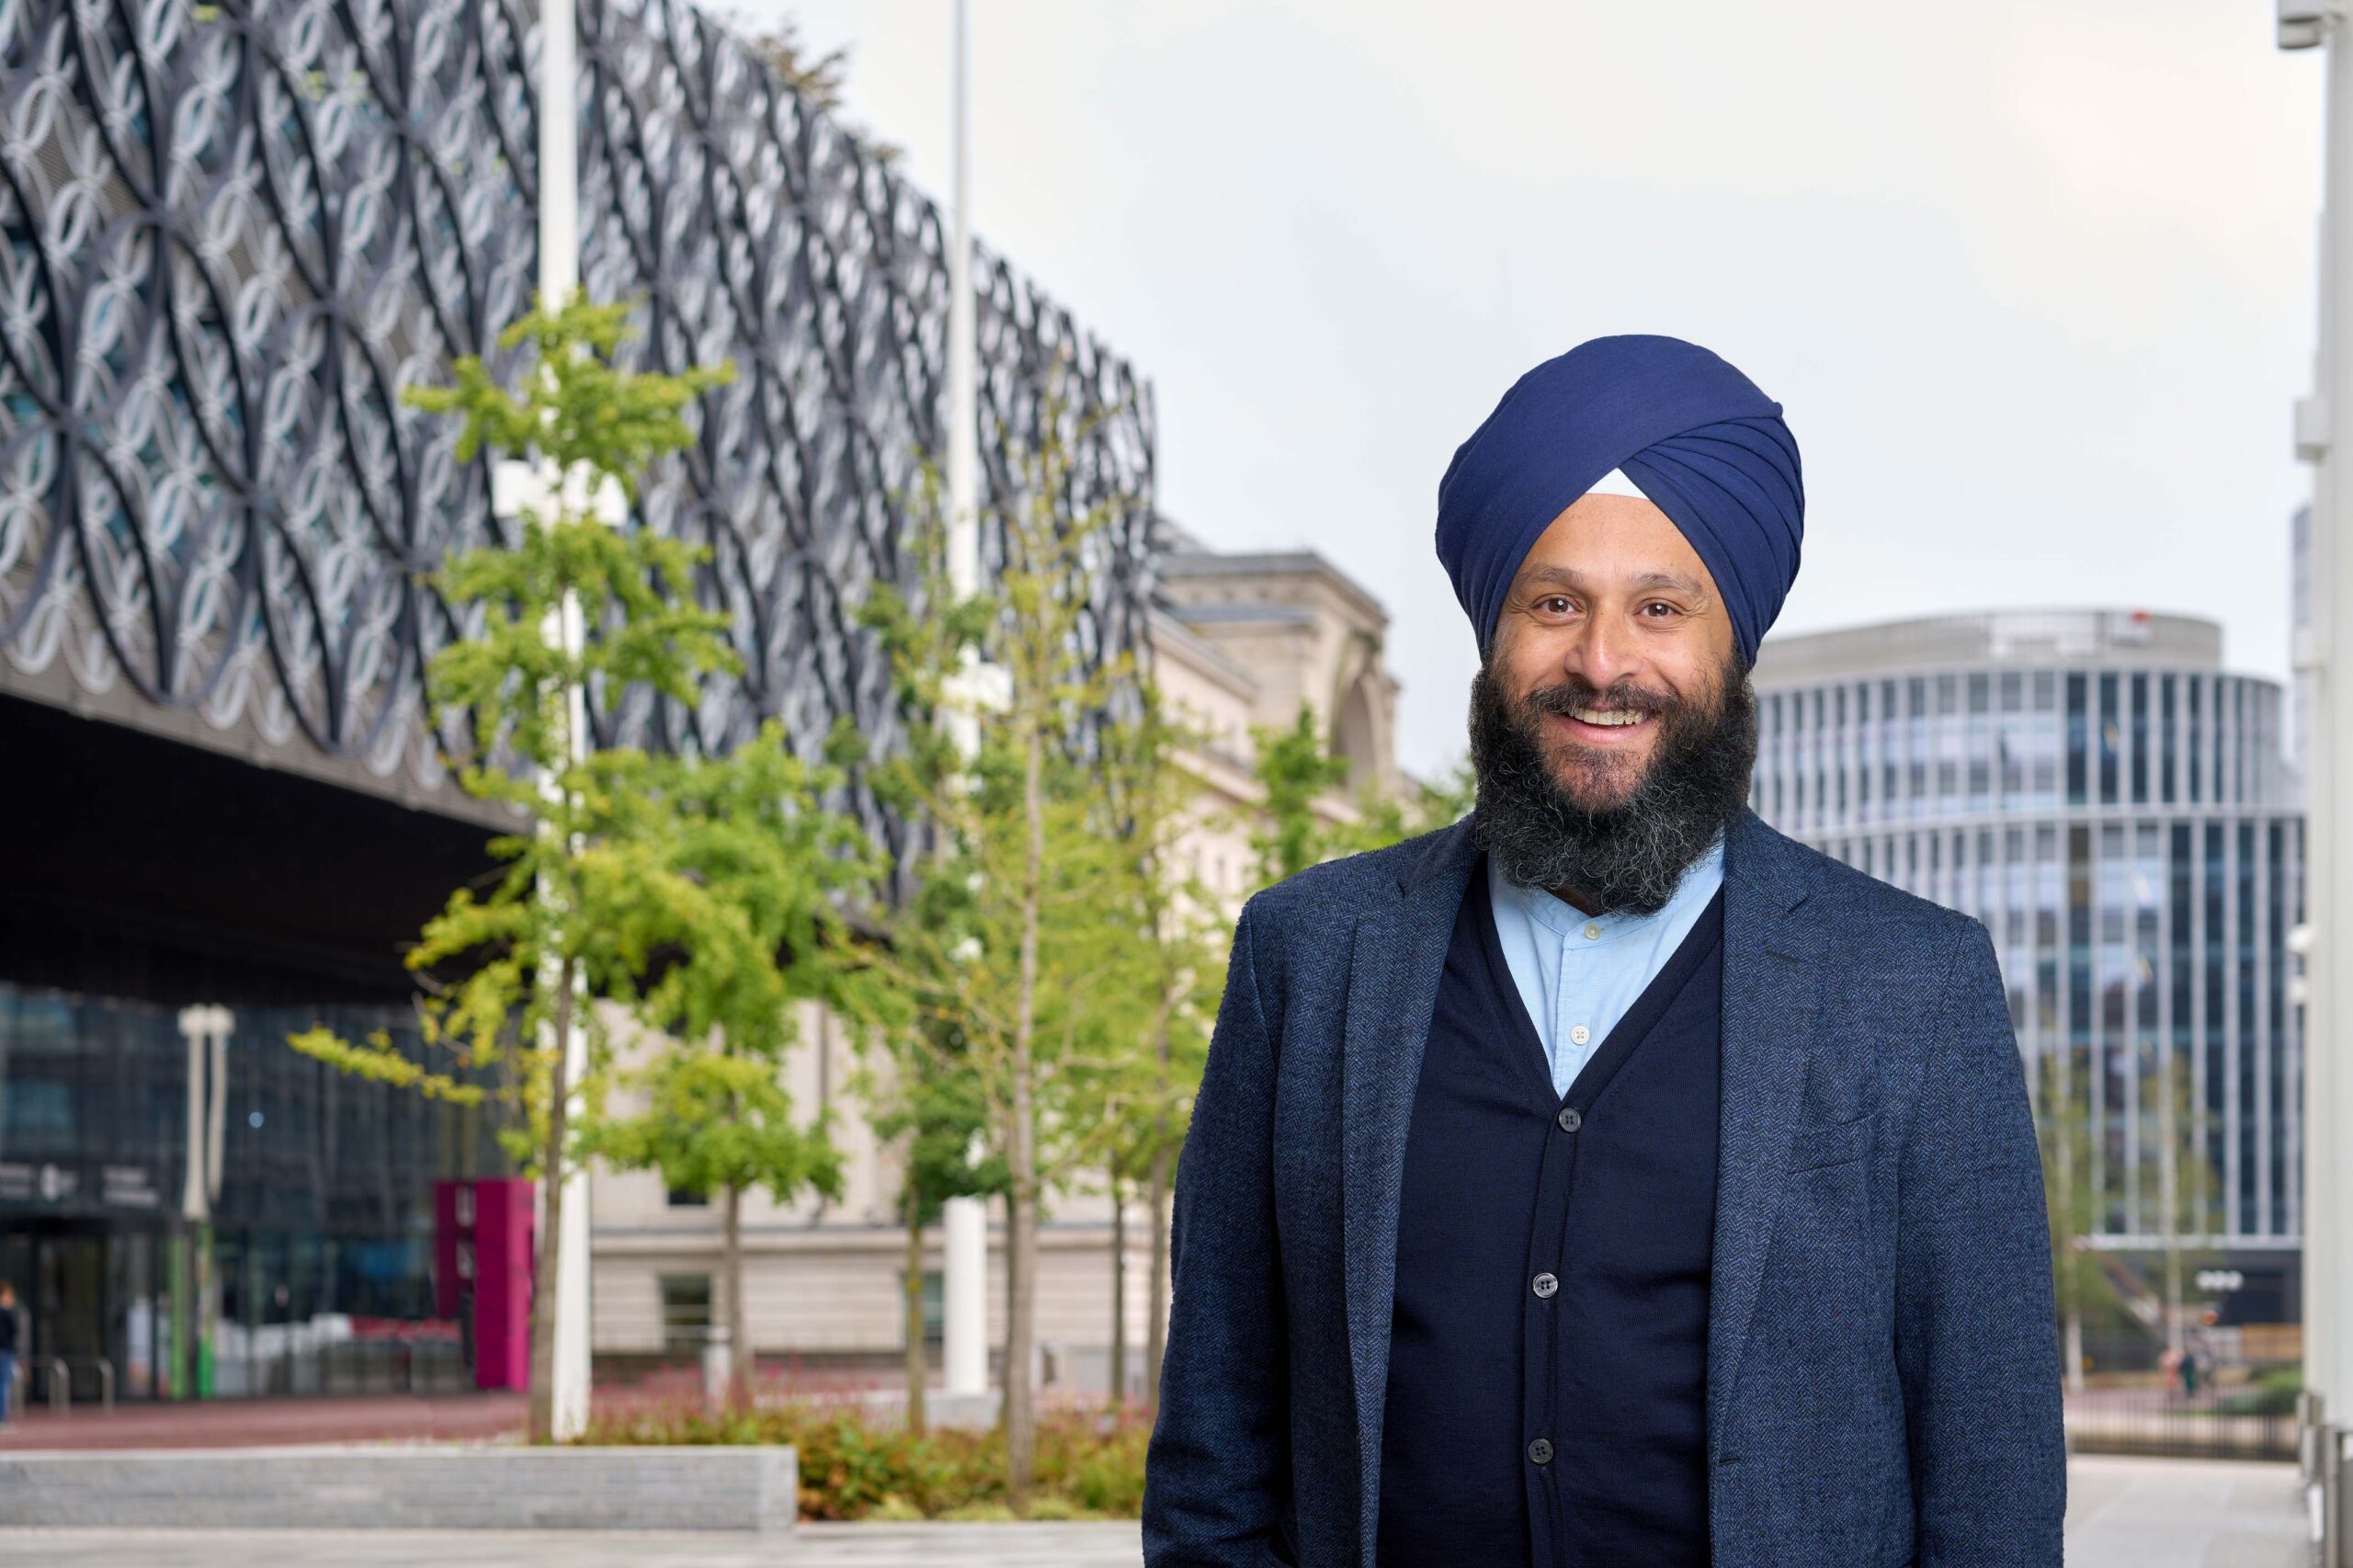 A man in a blue shirt, navy cardigan and blue suit jacket with a blue turban and beard is smiling and standing in front of some trees and buildings in central Birmingham.